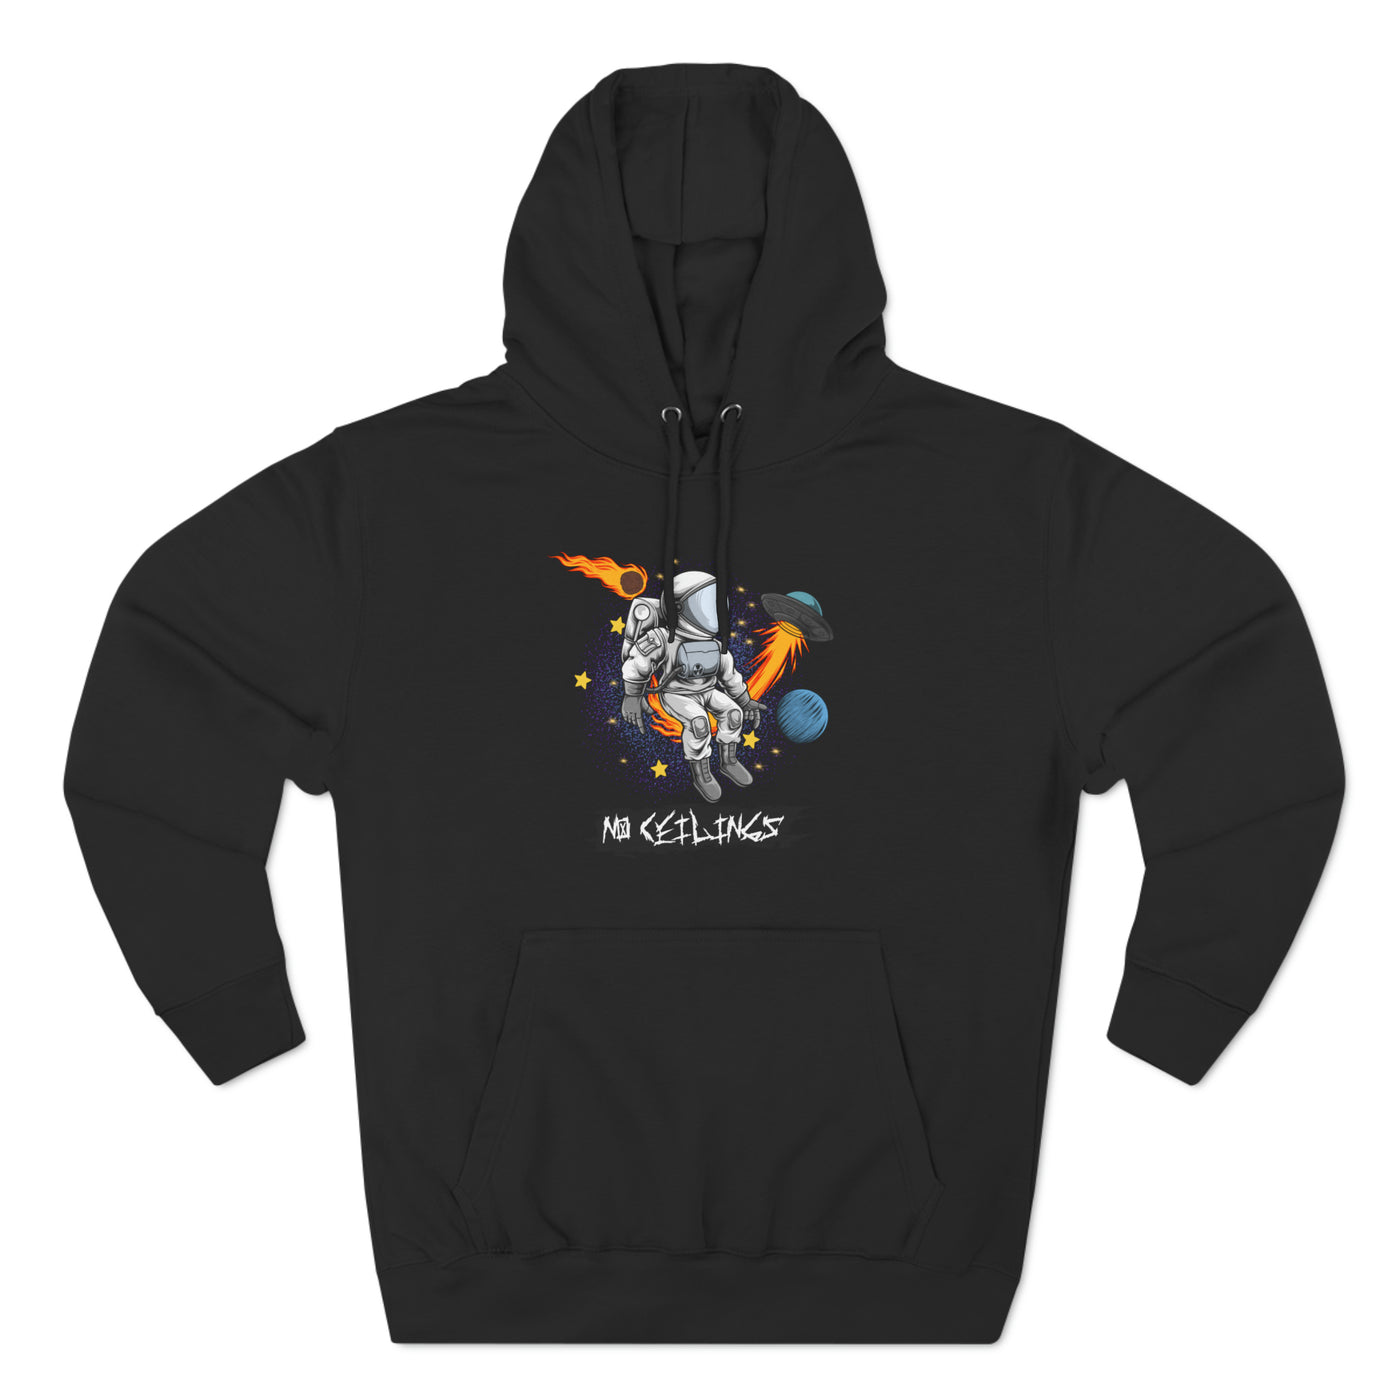 Noceilings out of this world Unisex Premium Crewneck Hoodie